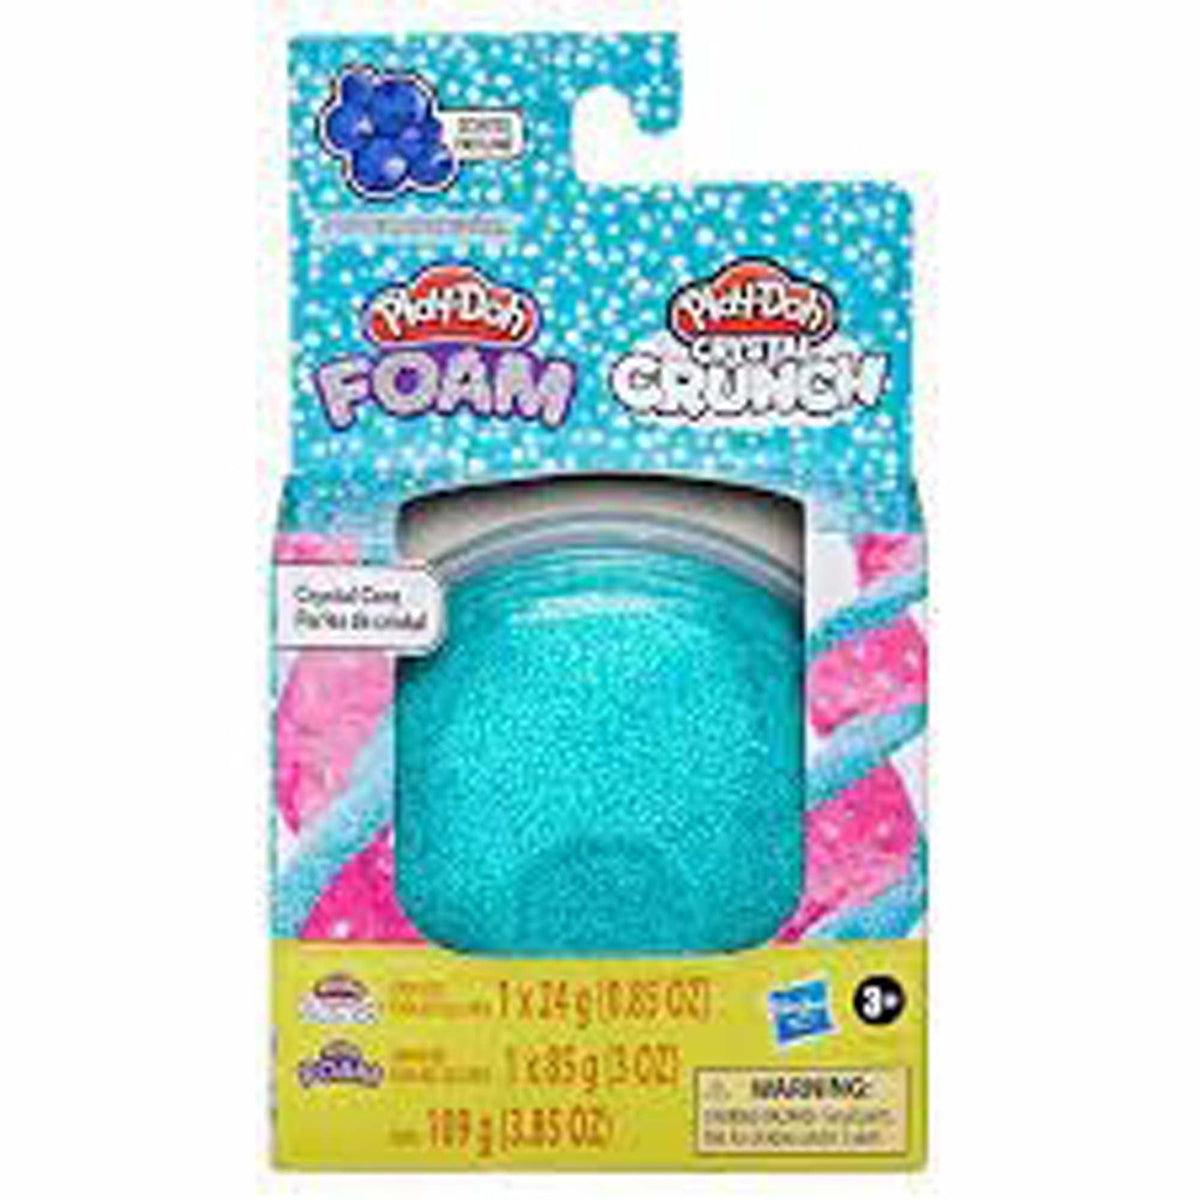 HASBRO Toys & Games Play-Doh Diamond Scented Foam, 1 Count